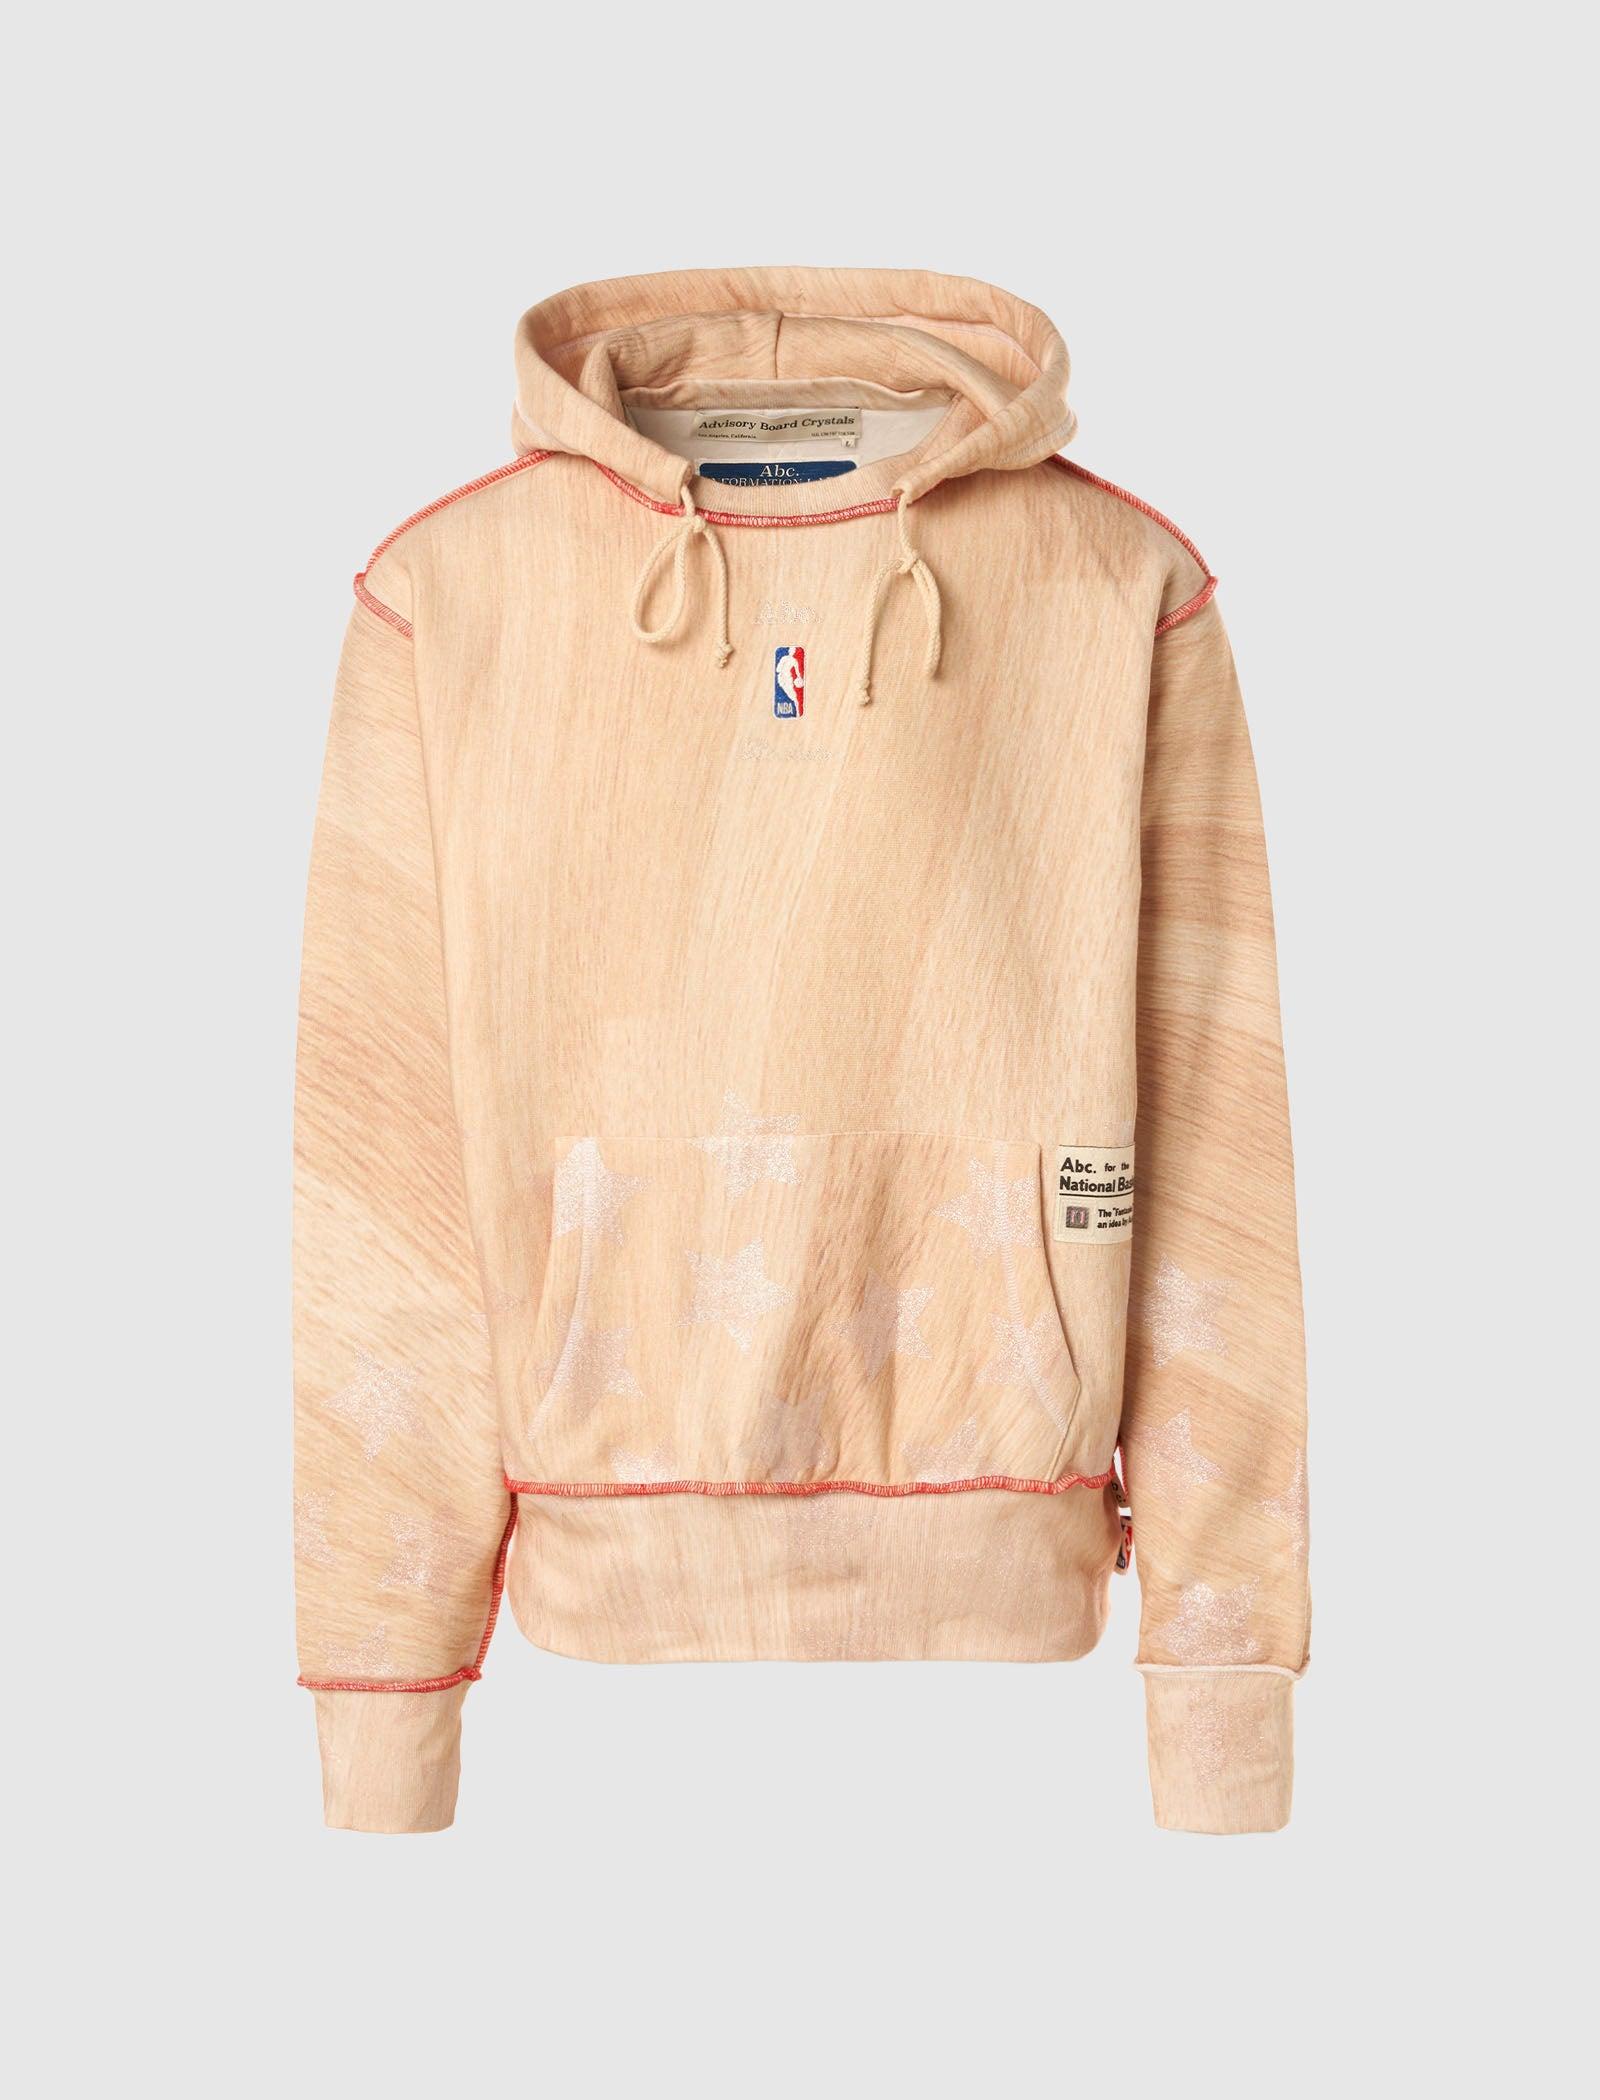 Advisory Board Crystals Nba Houston Hoodie in Natural for Men